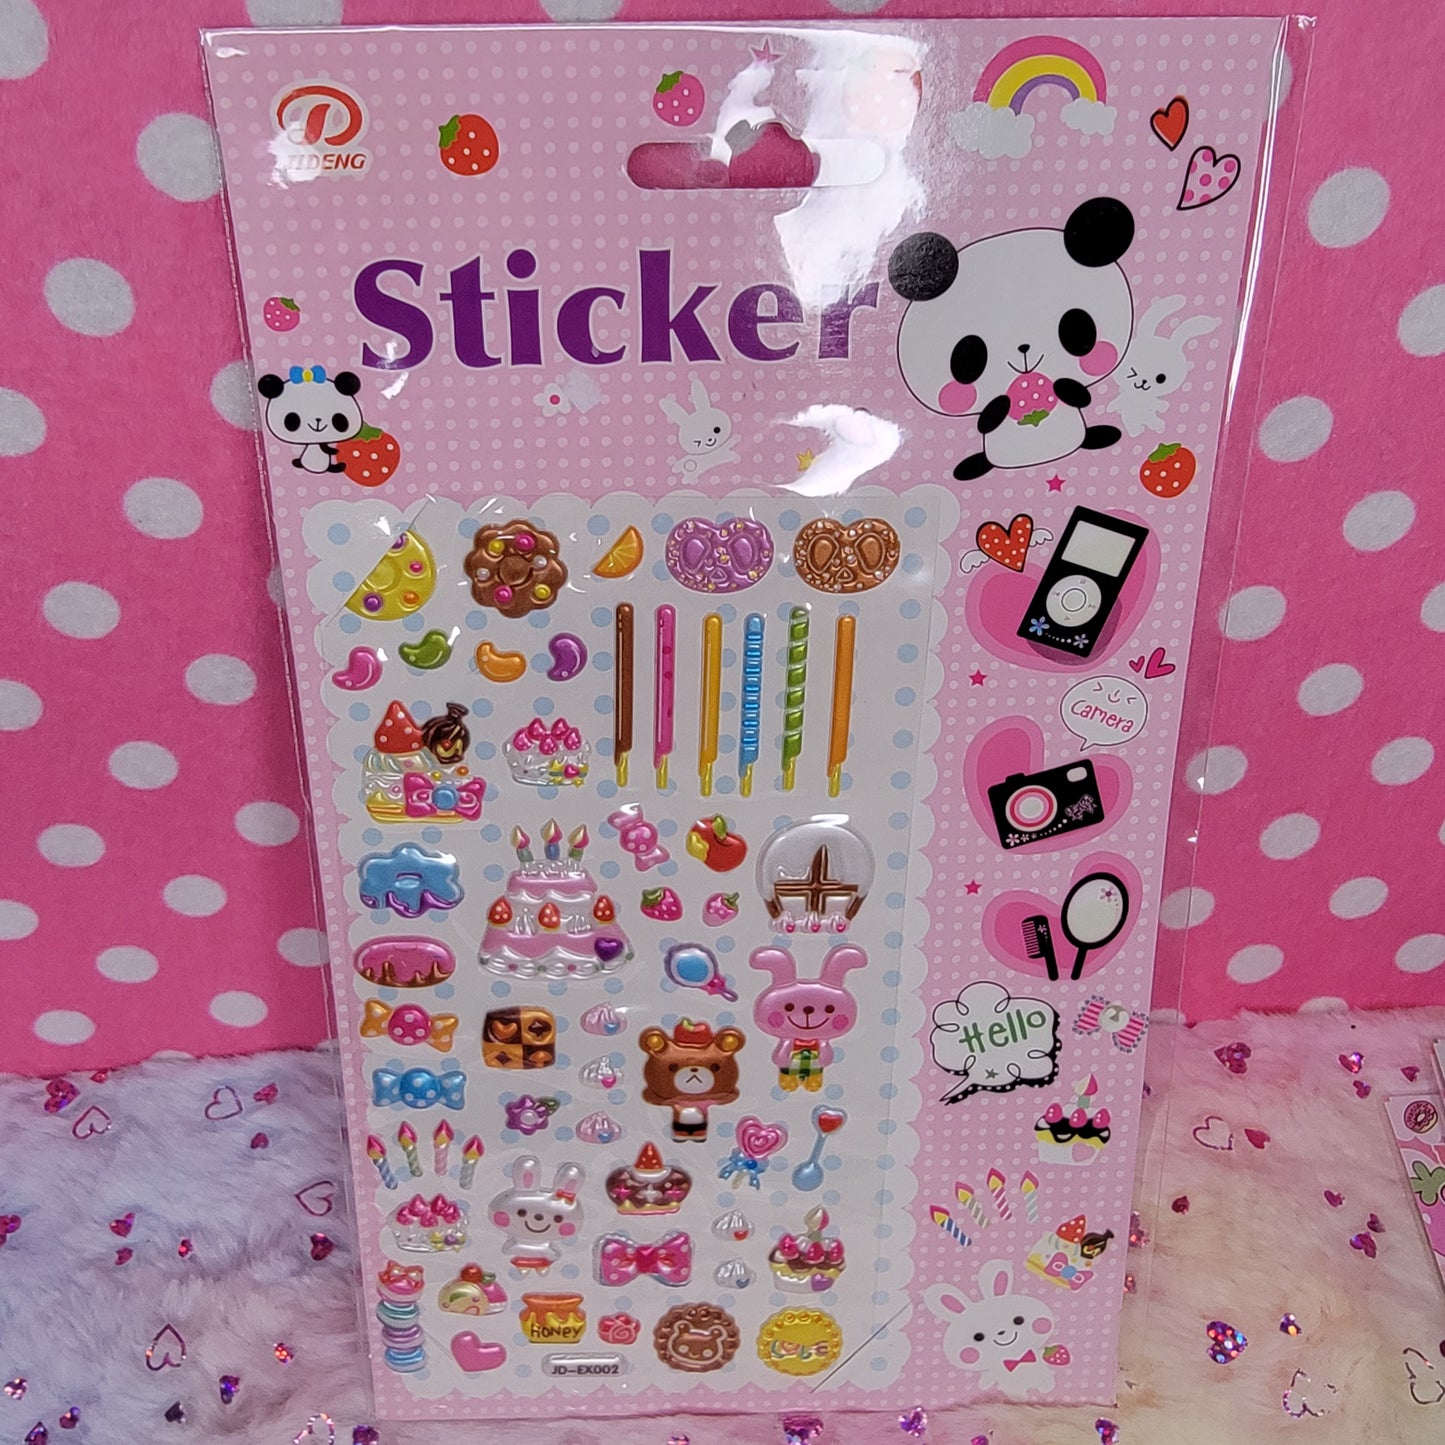 3D Animals and Desserts Themed Stickers